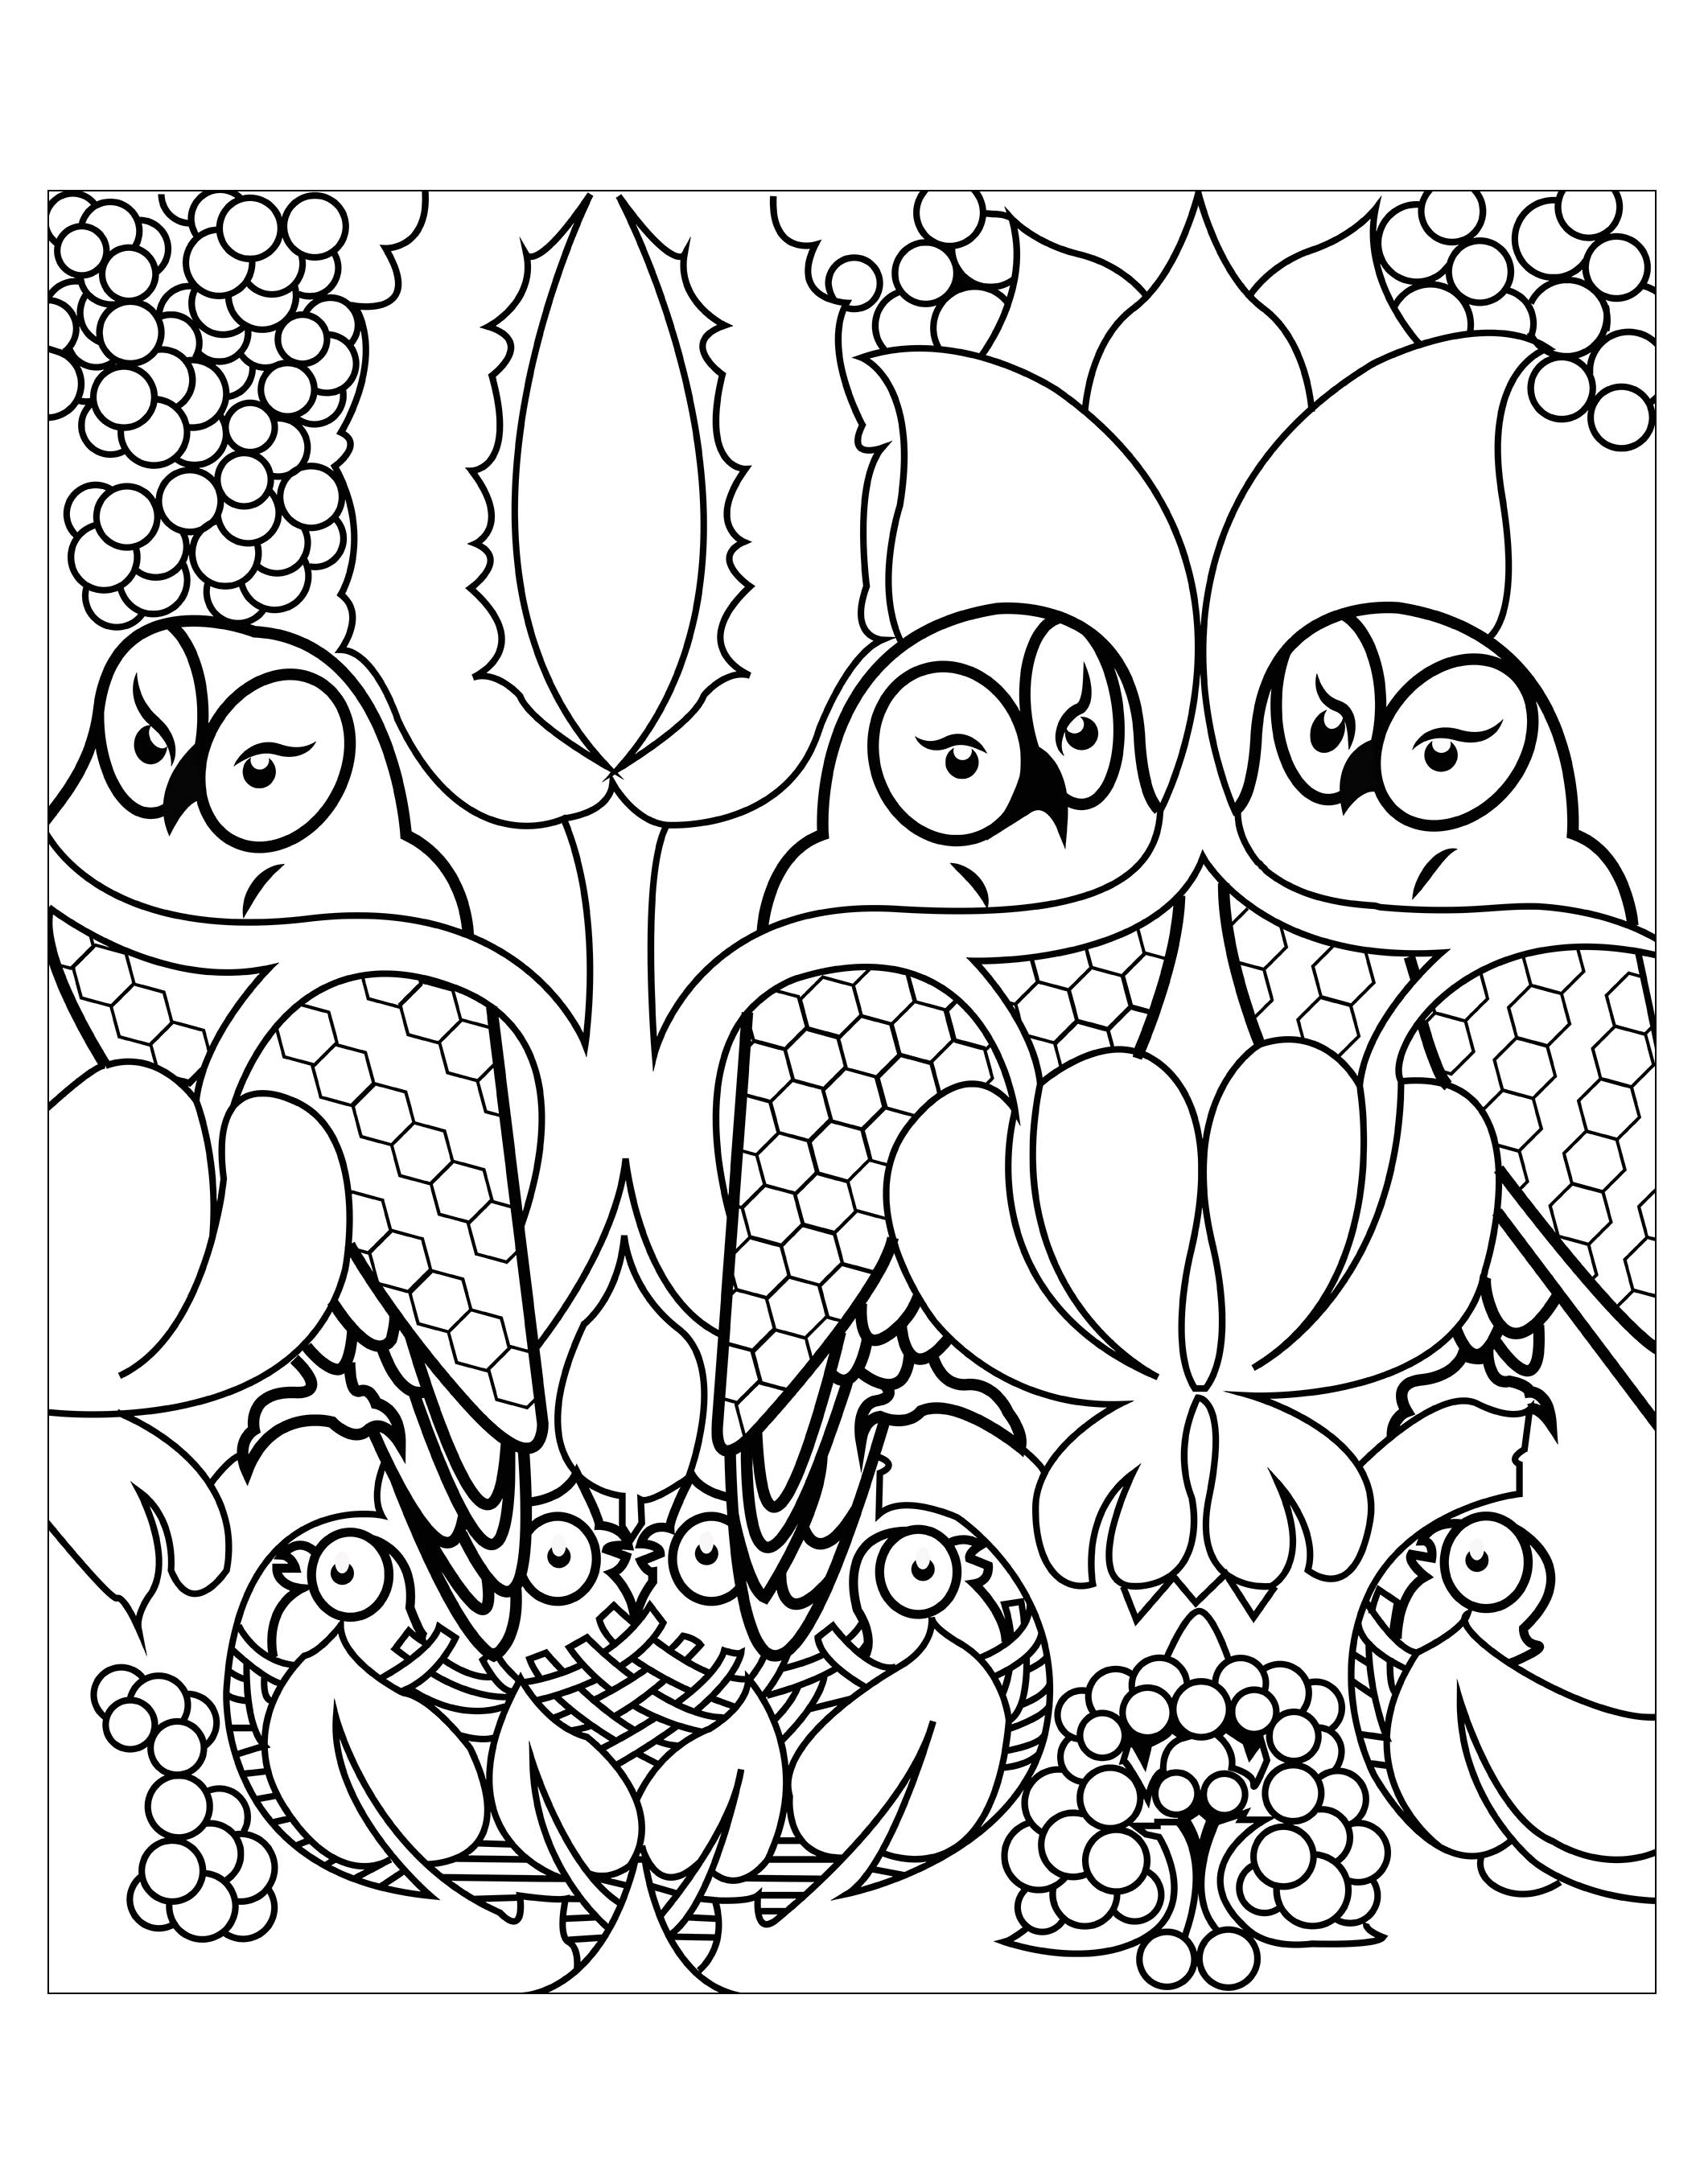 Coloring page inspired by a textile design (CFA Voysey, England, 1897), Artist : Caillou